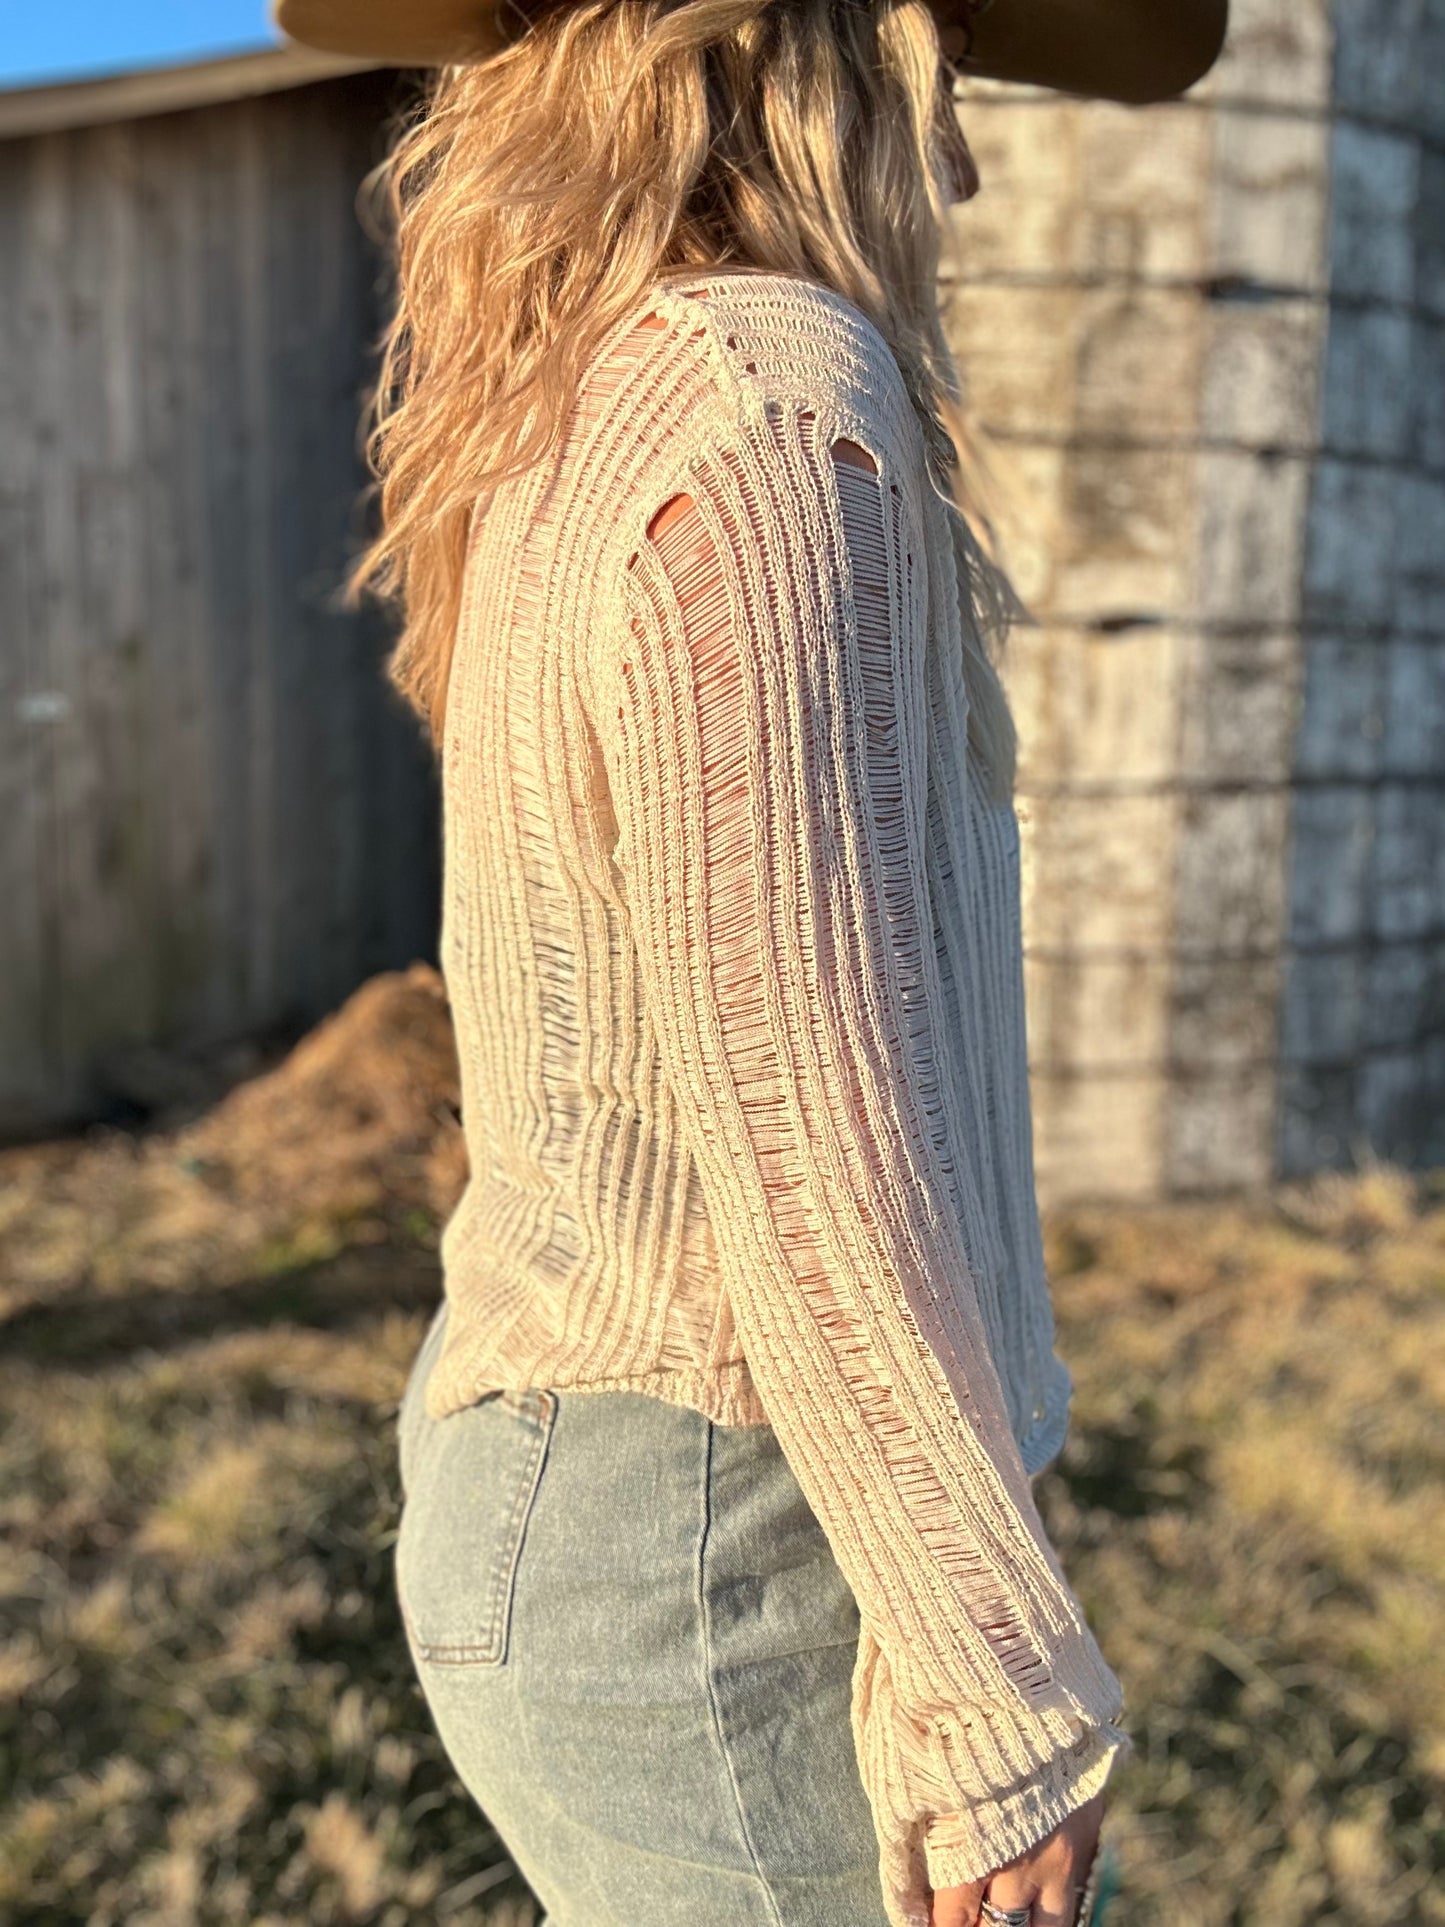 Astrid’s Distressed Sweater